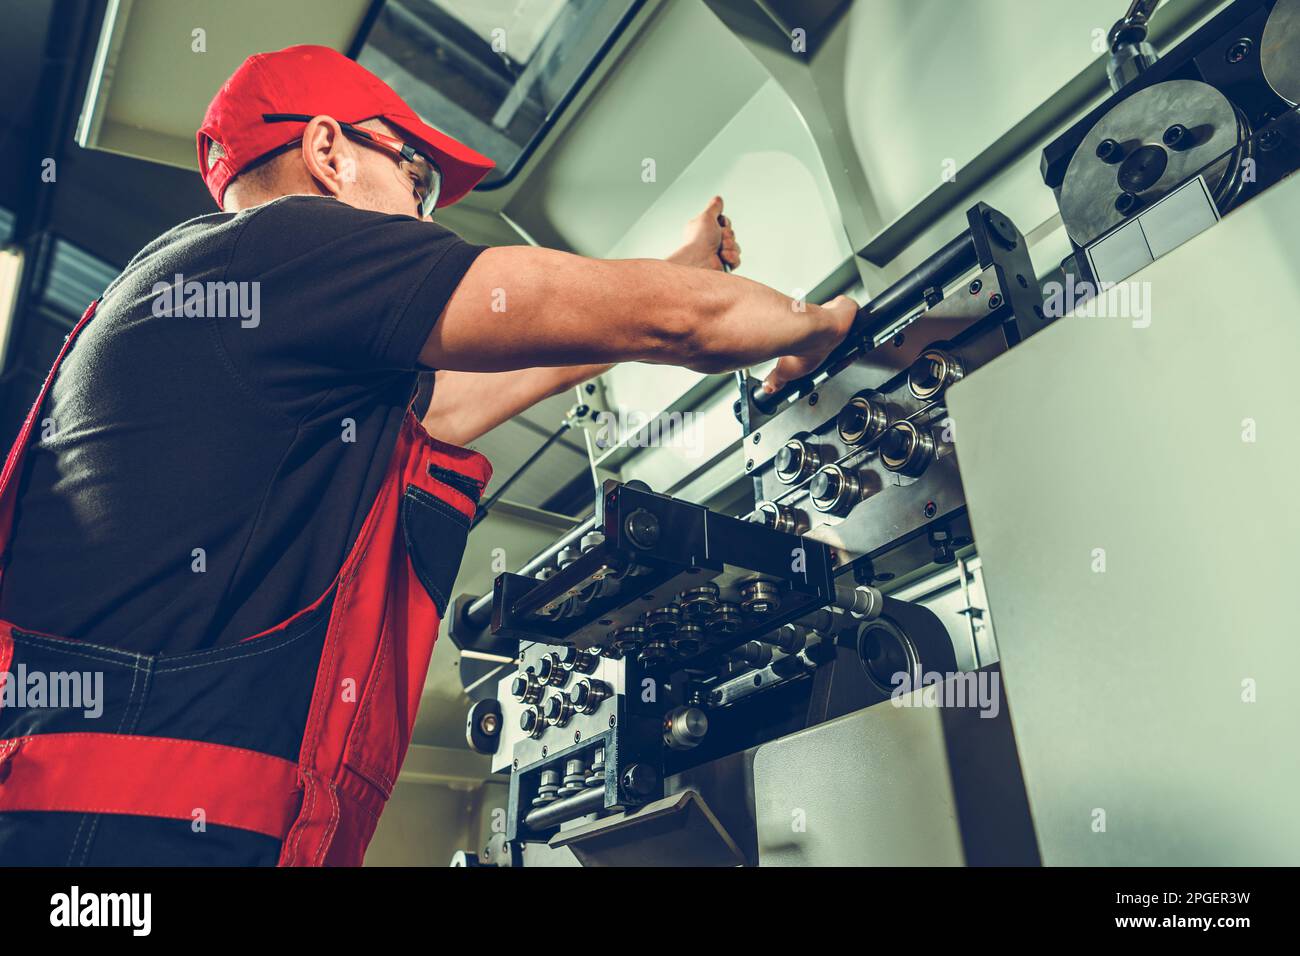 Modern Automatic Metalworking Wire Bending Machine Operator In Front of the Machinery. Stock Photo